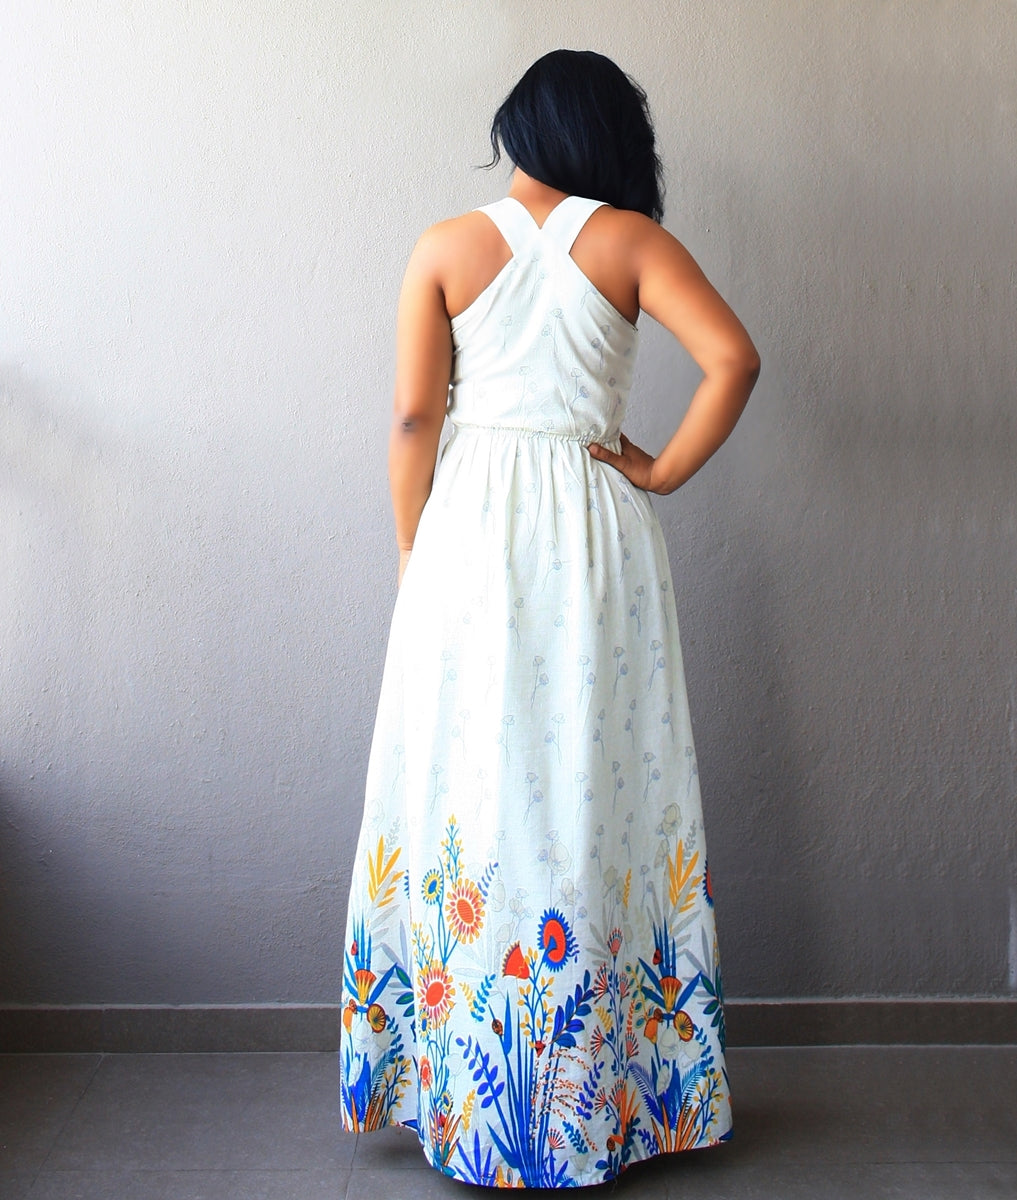 Off White Maxi Dress with Floral Border